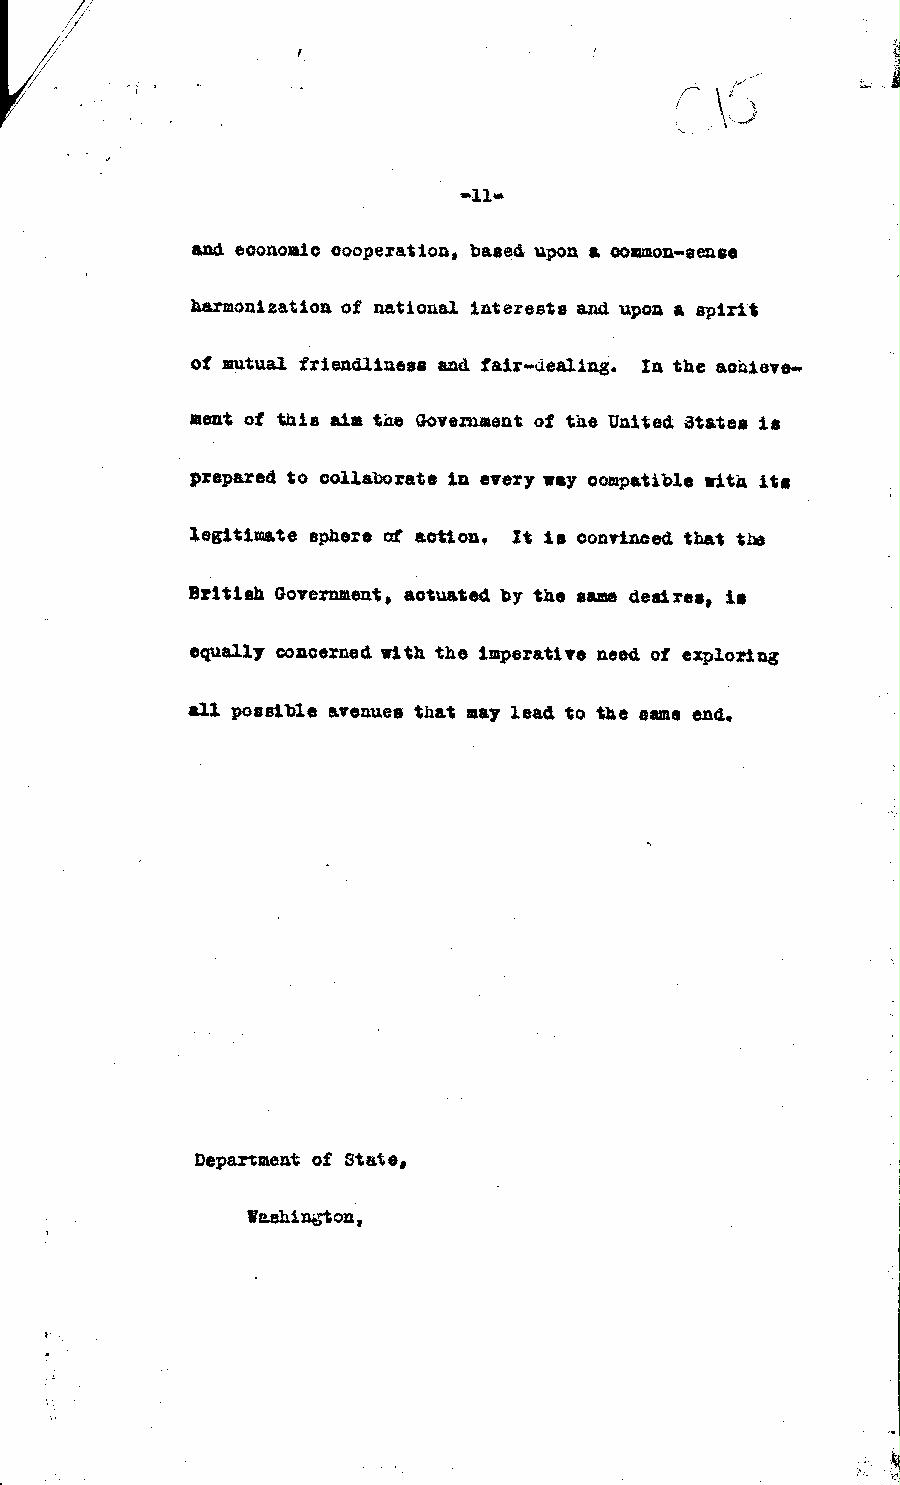 [a303c15.jpg] - Cont-memo from Dept. of State5/28/37